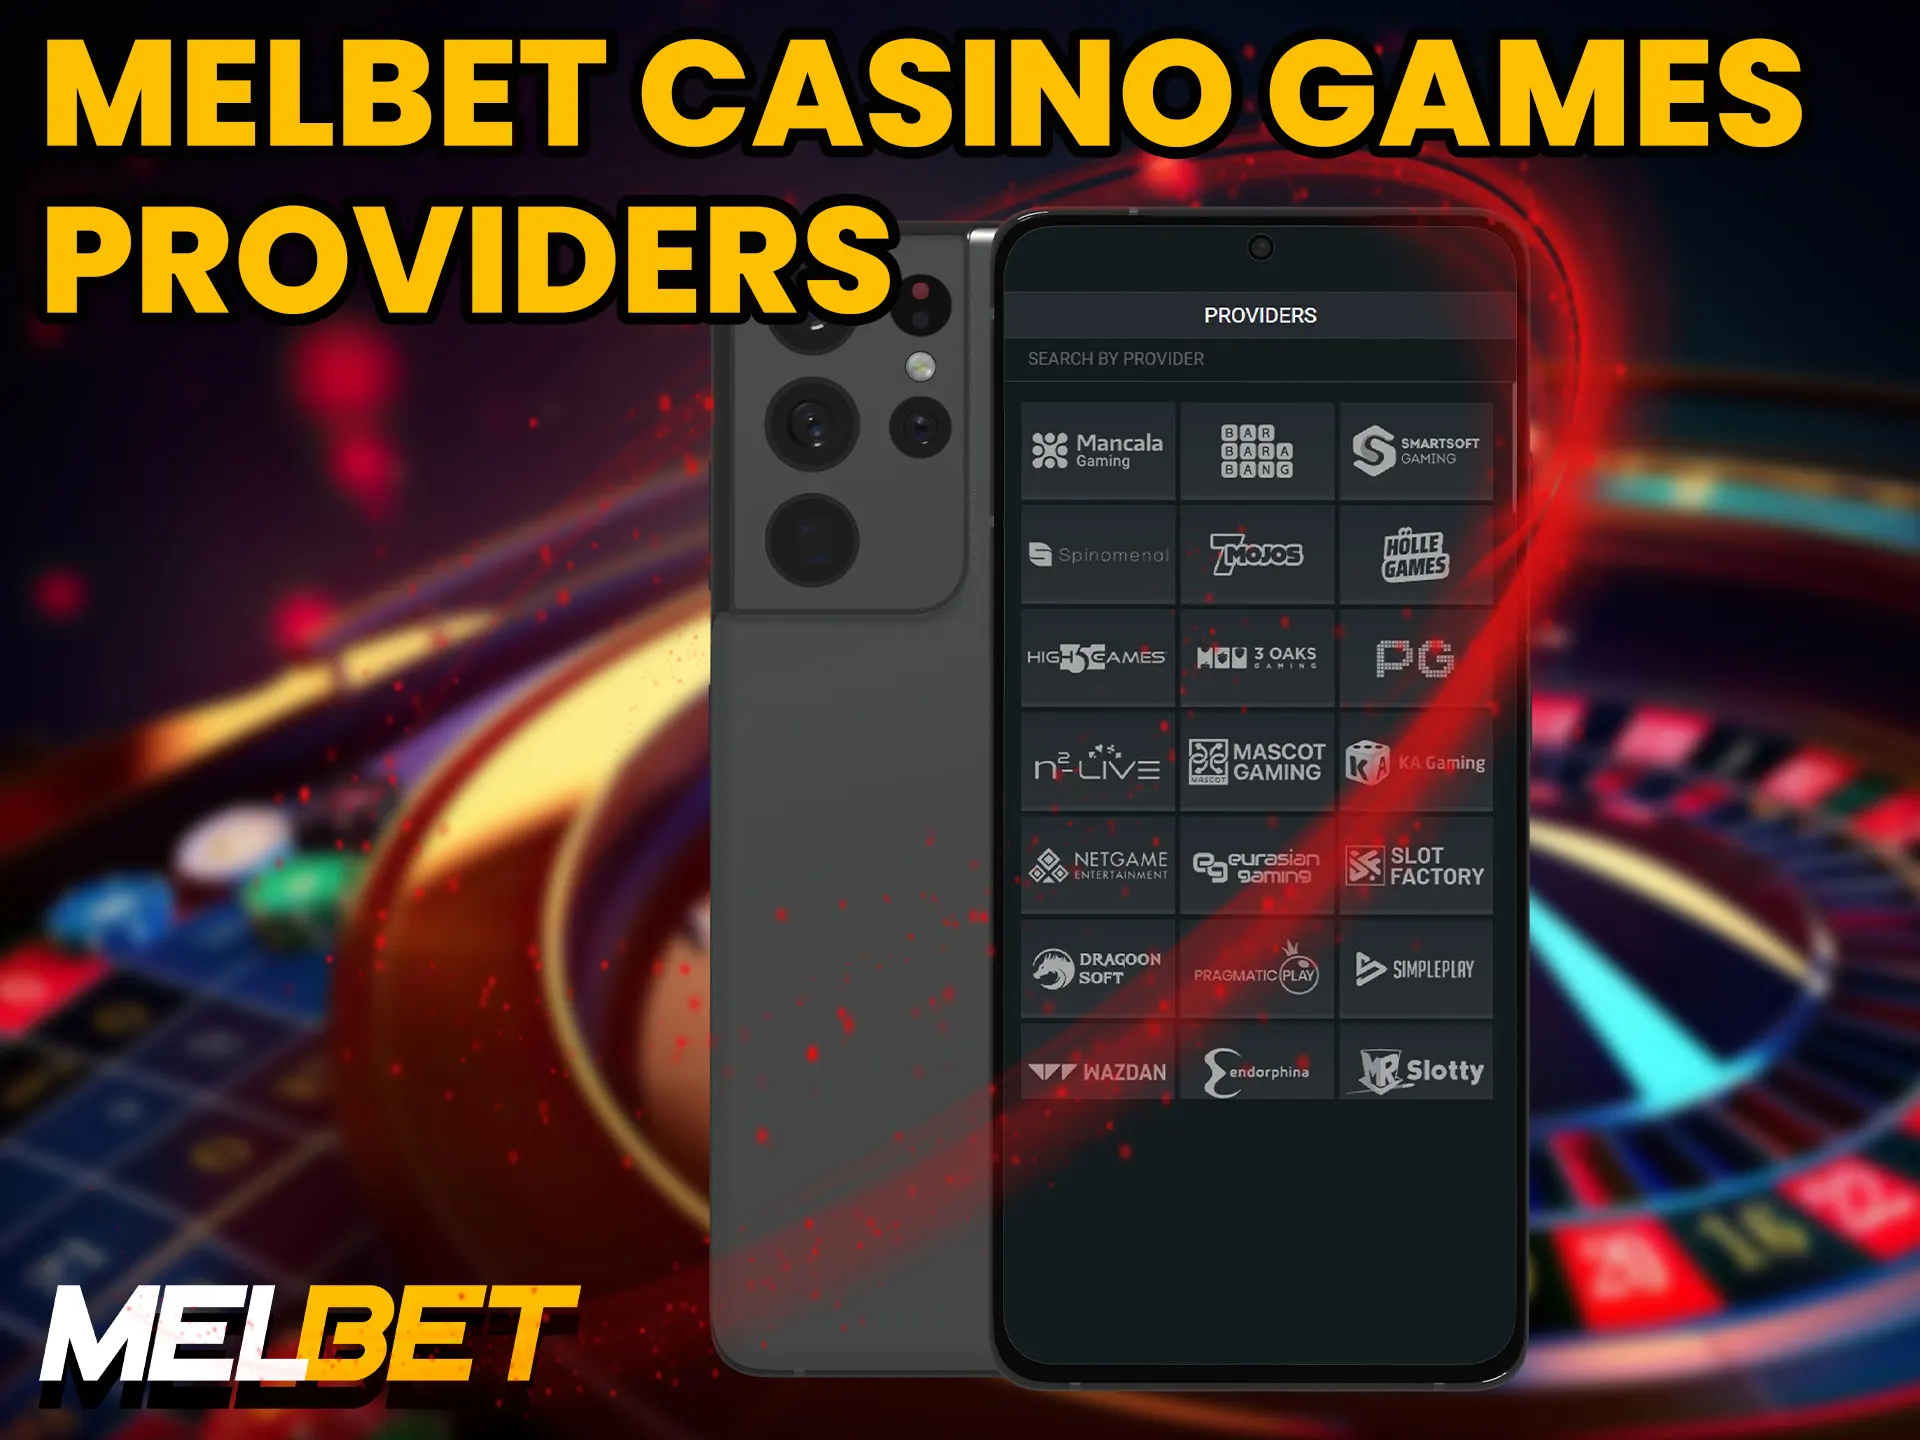 Choose your favorite providers and play hundreds of gambling games at Melbet.